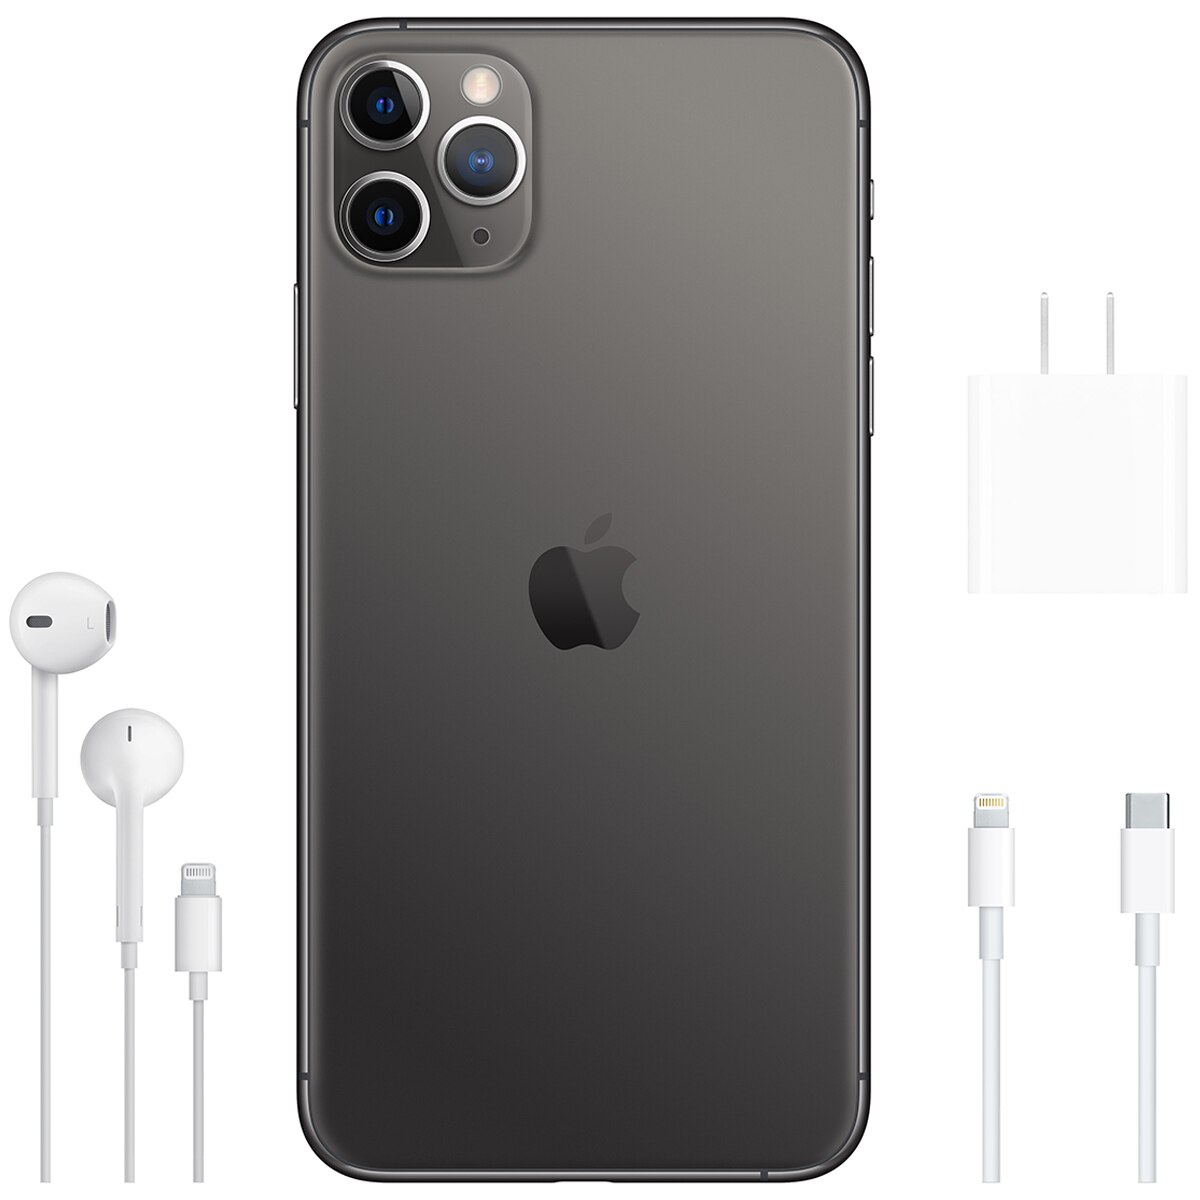 Iphone 11 Pro Max 64Gb Space Grey